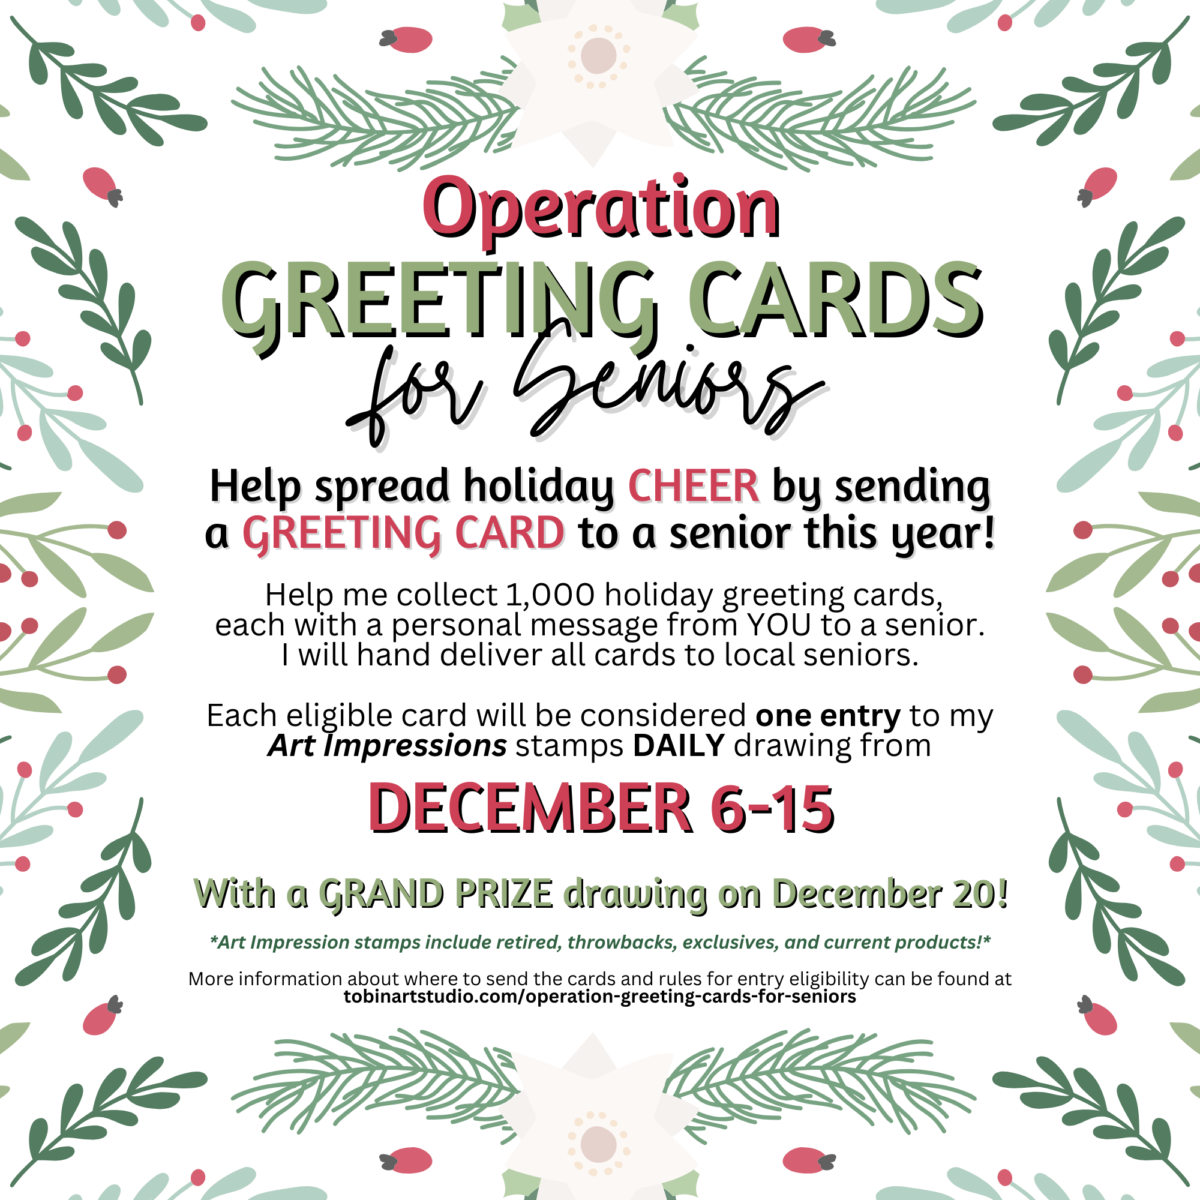 Operation Greeting Cards for Seniors | Art Impressions Giveaways